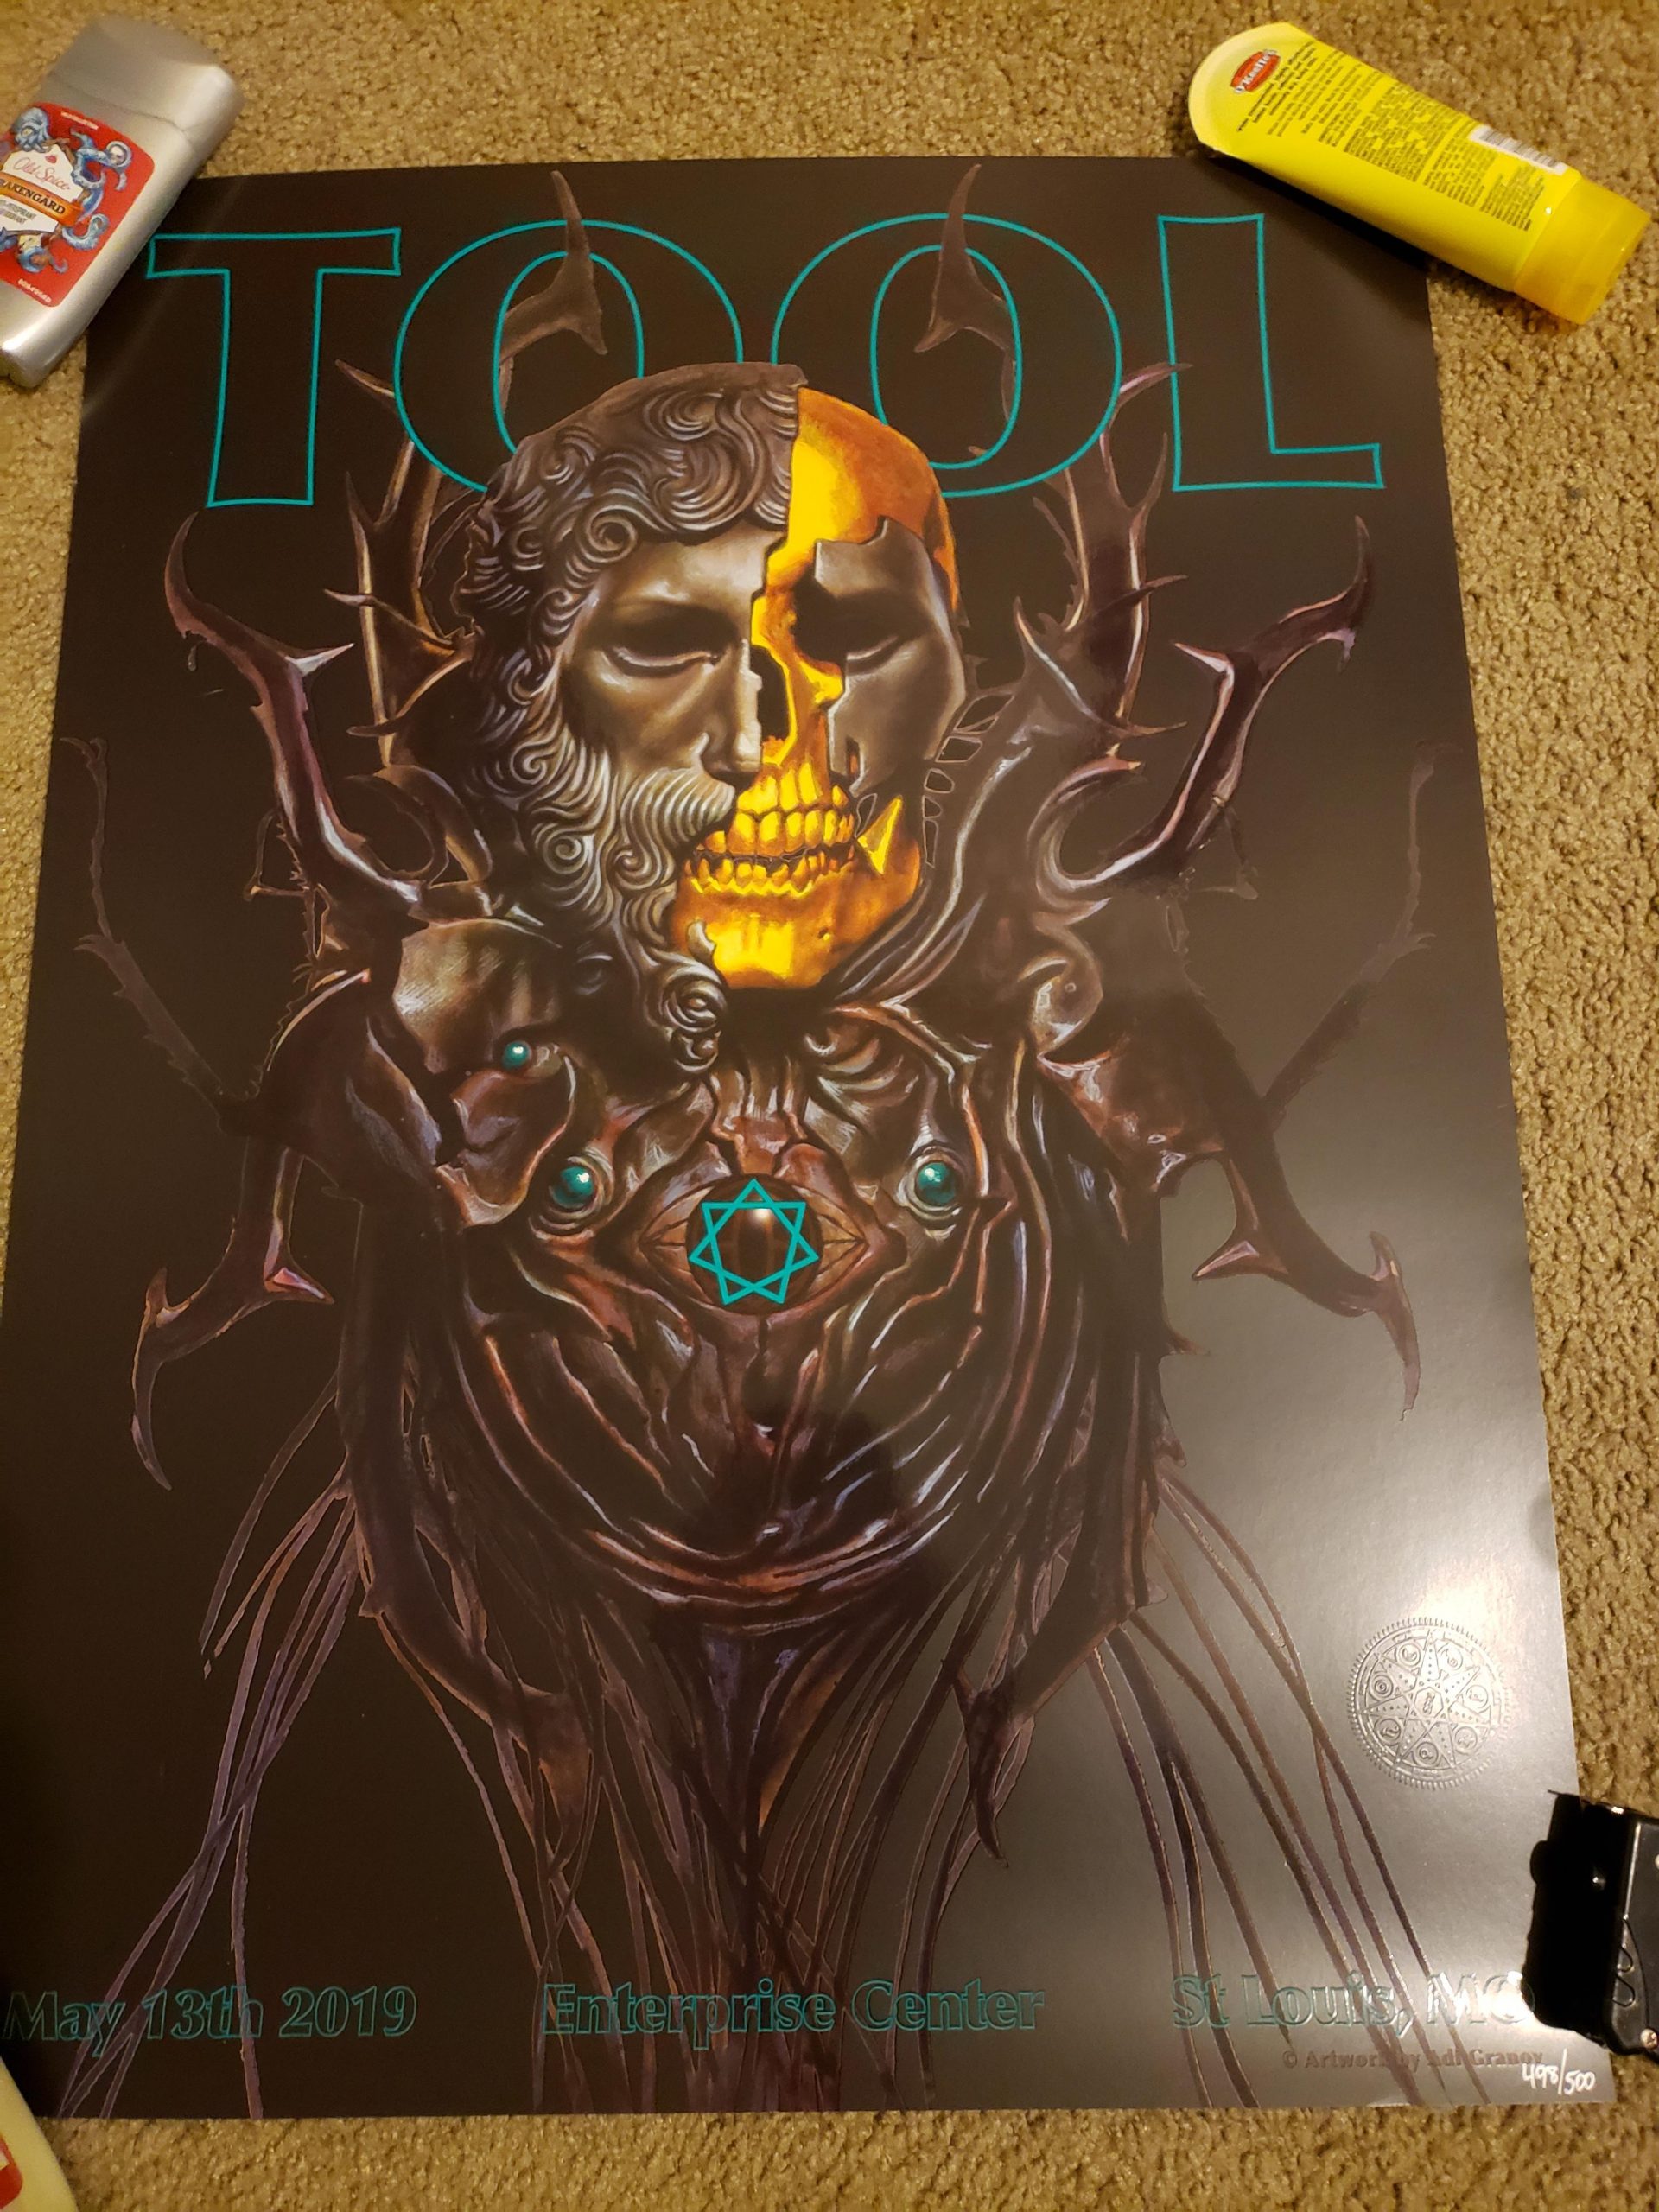 May 13, 2019 - Enterprise Center - St. Louis - TOOL Poster Archive